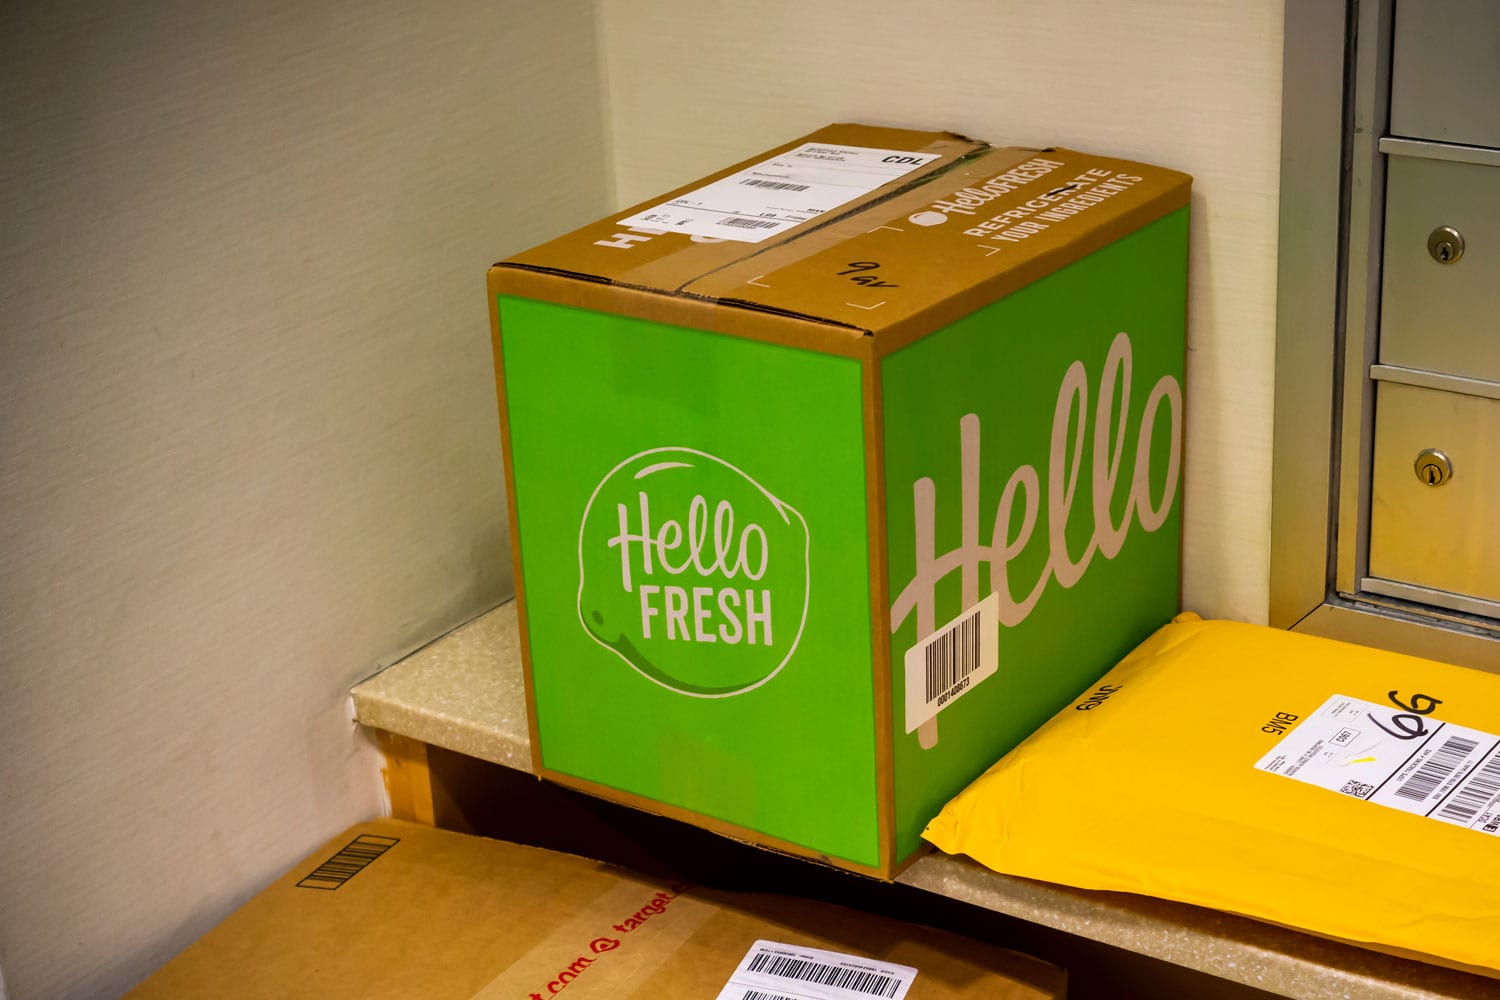 A delivery from the Hello Fresh meal subscription service waits to be picked up in the lobby of an apartment building